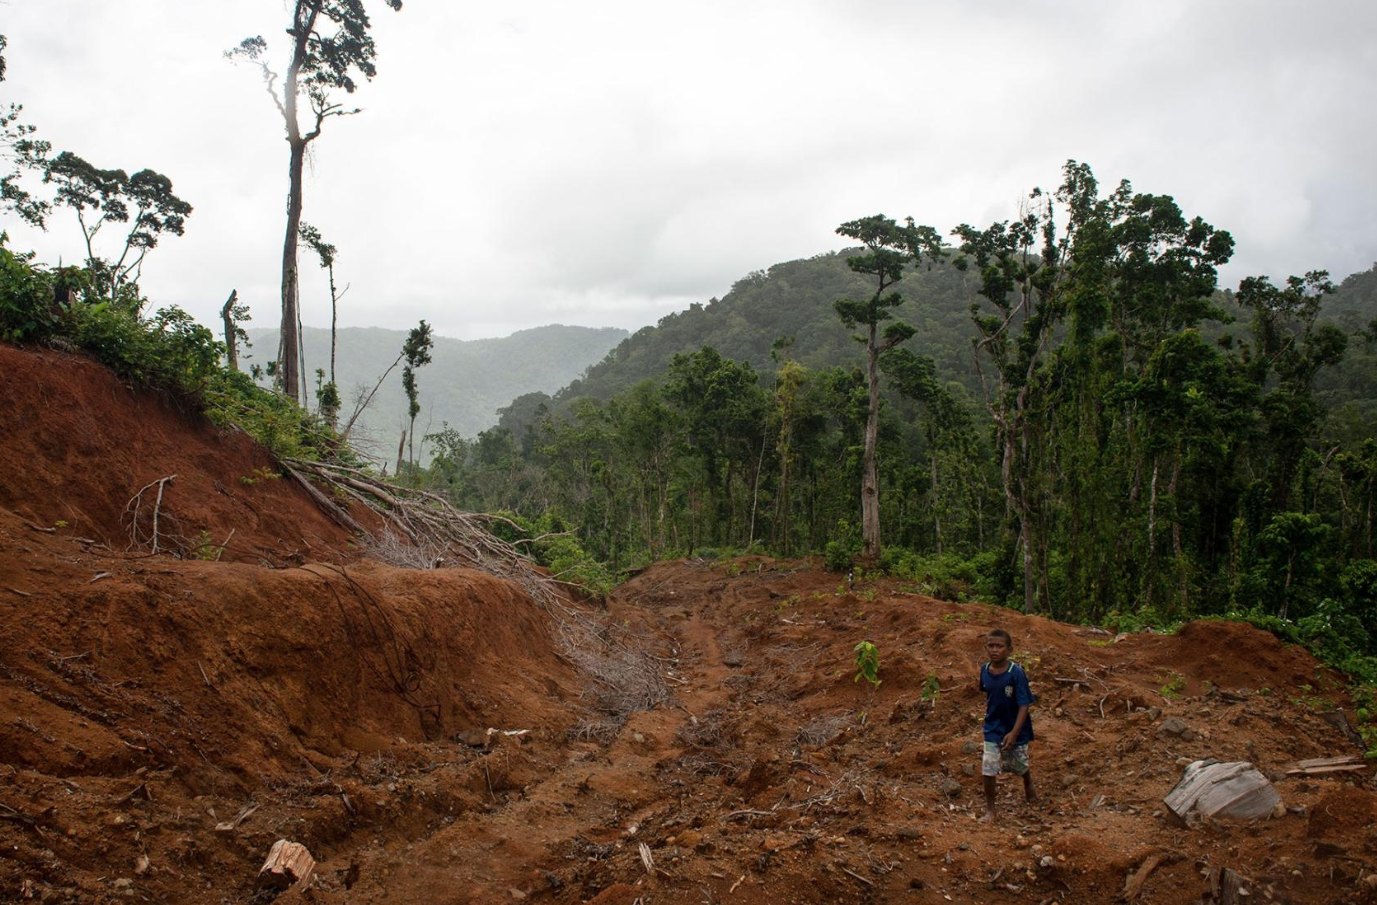 A logging road leads up to the main camp of Gallego, a logging company forced to stop operations by a local community. Image by Monique Jaques. Solomon Islands, 2020.